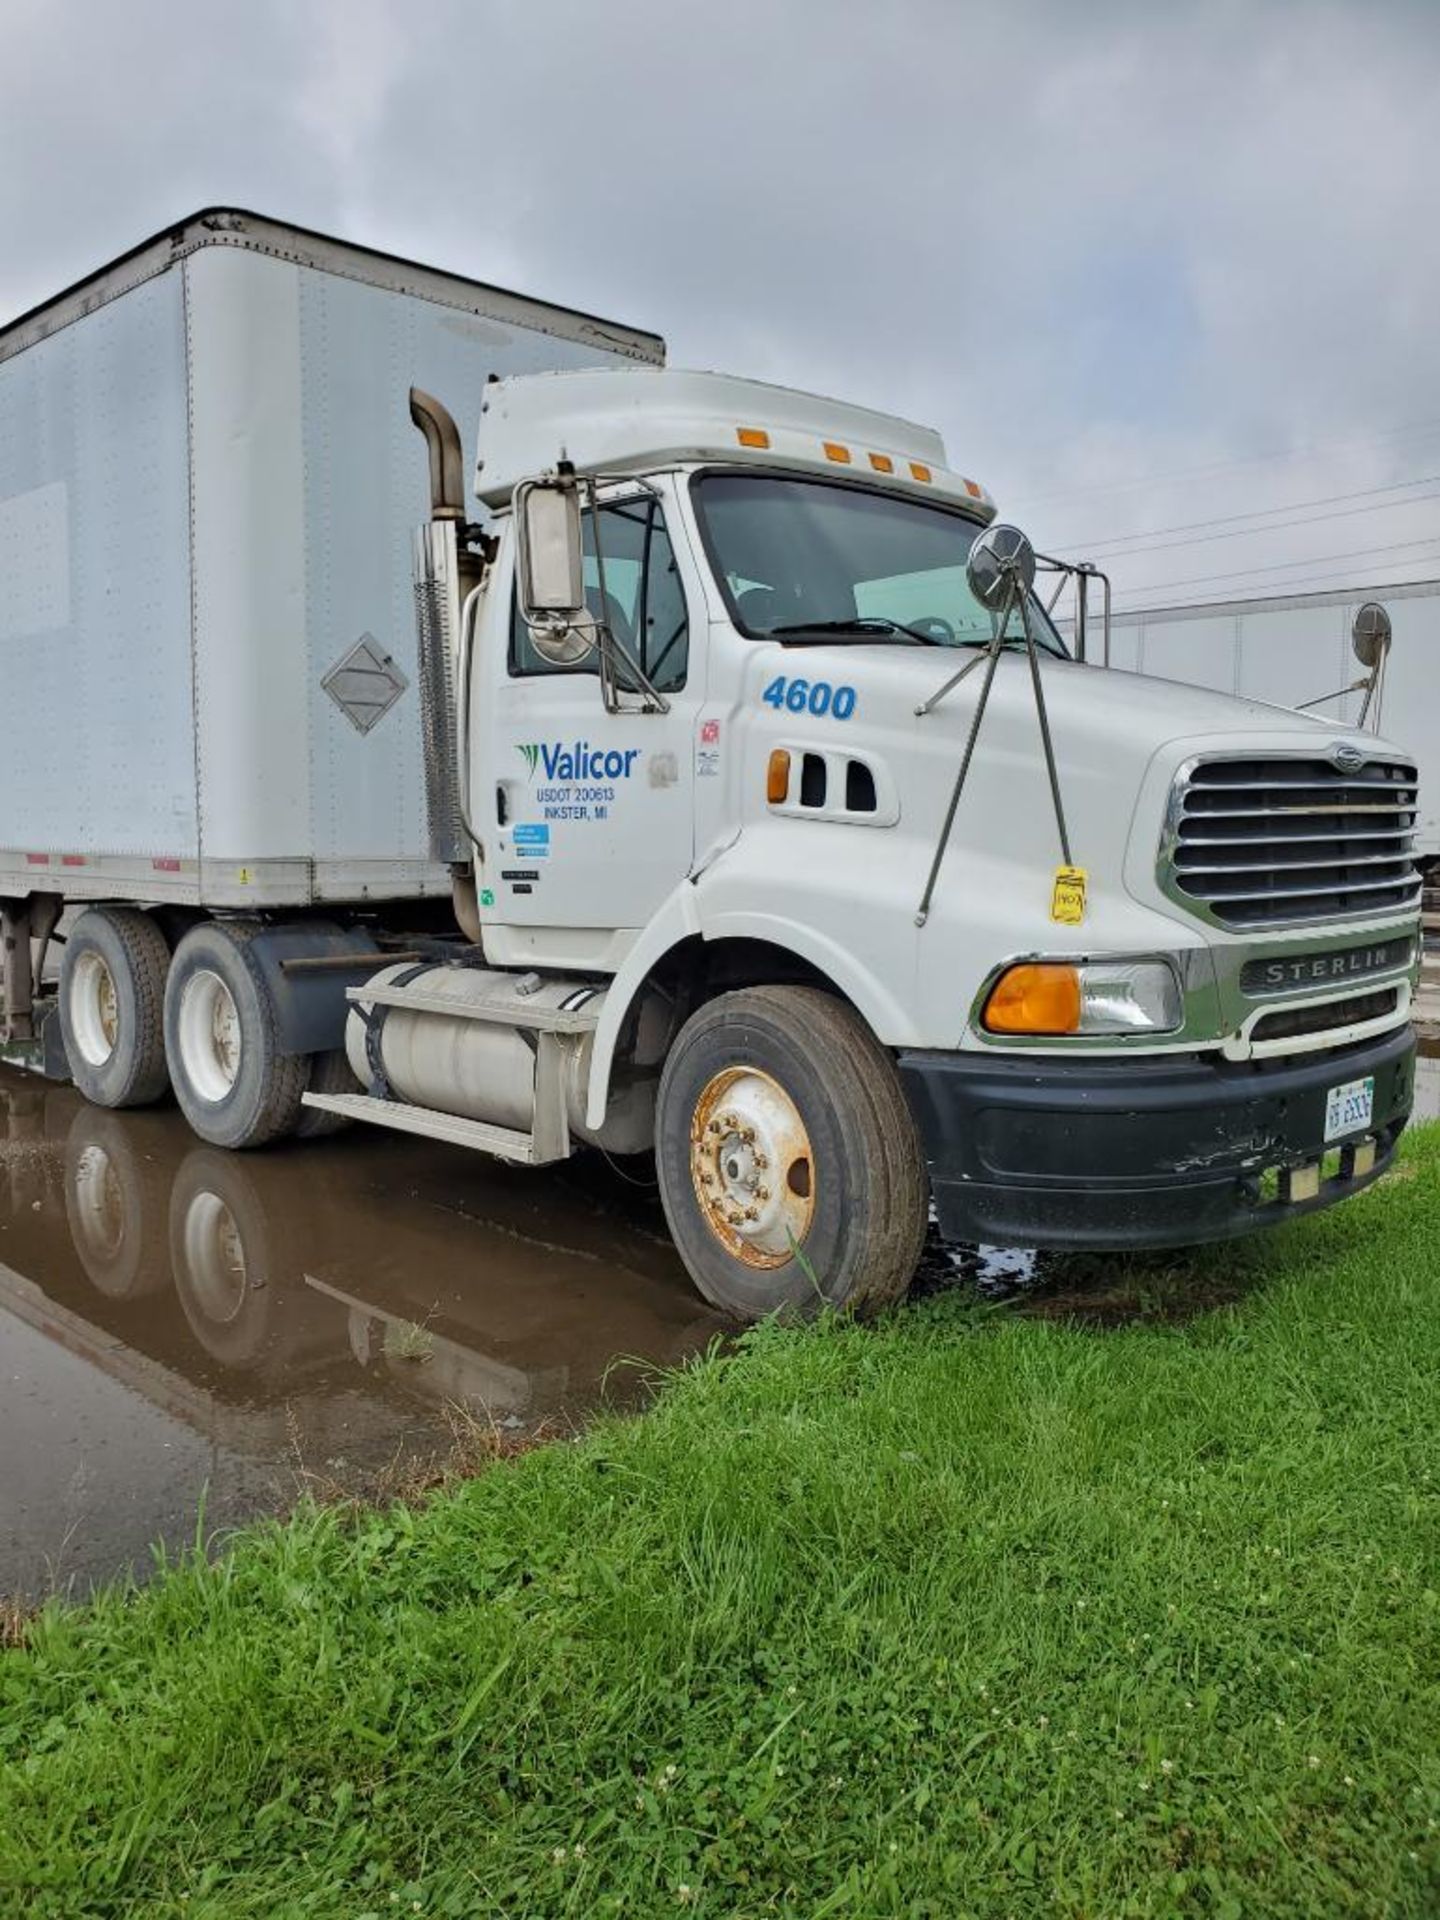 2007 STERLING AT9500 SEMI-TRACTOR, VIN 2FWJA3CV67AX84600, TANDEM AXLE, DAY CAB, 731,000 MILES, MERCE - Image 4 of 13